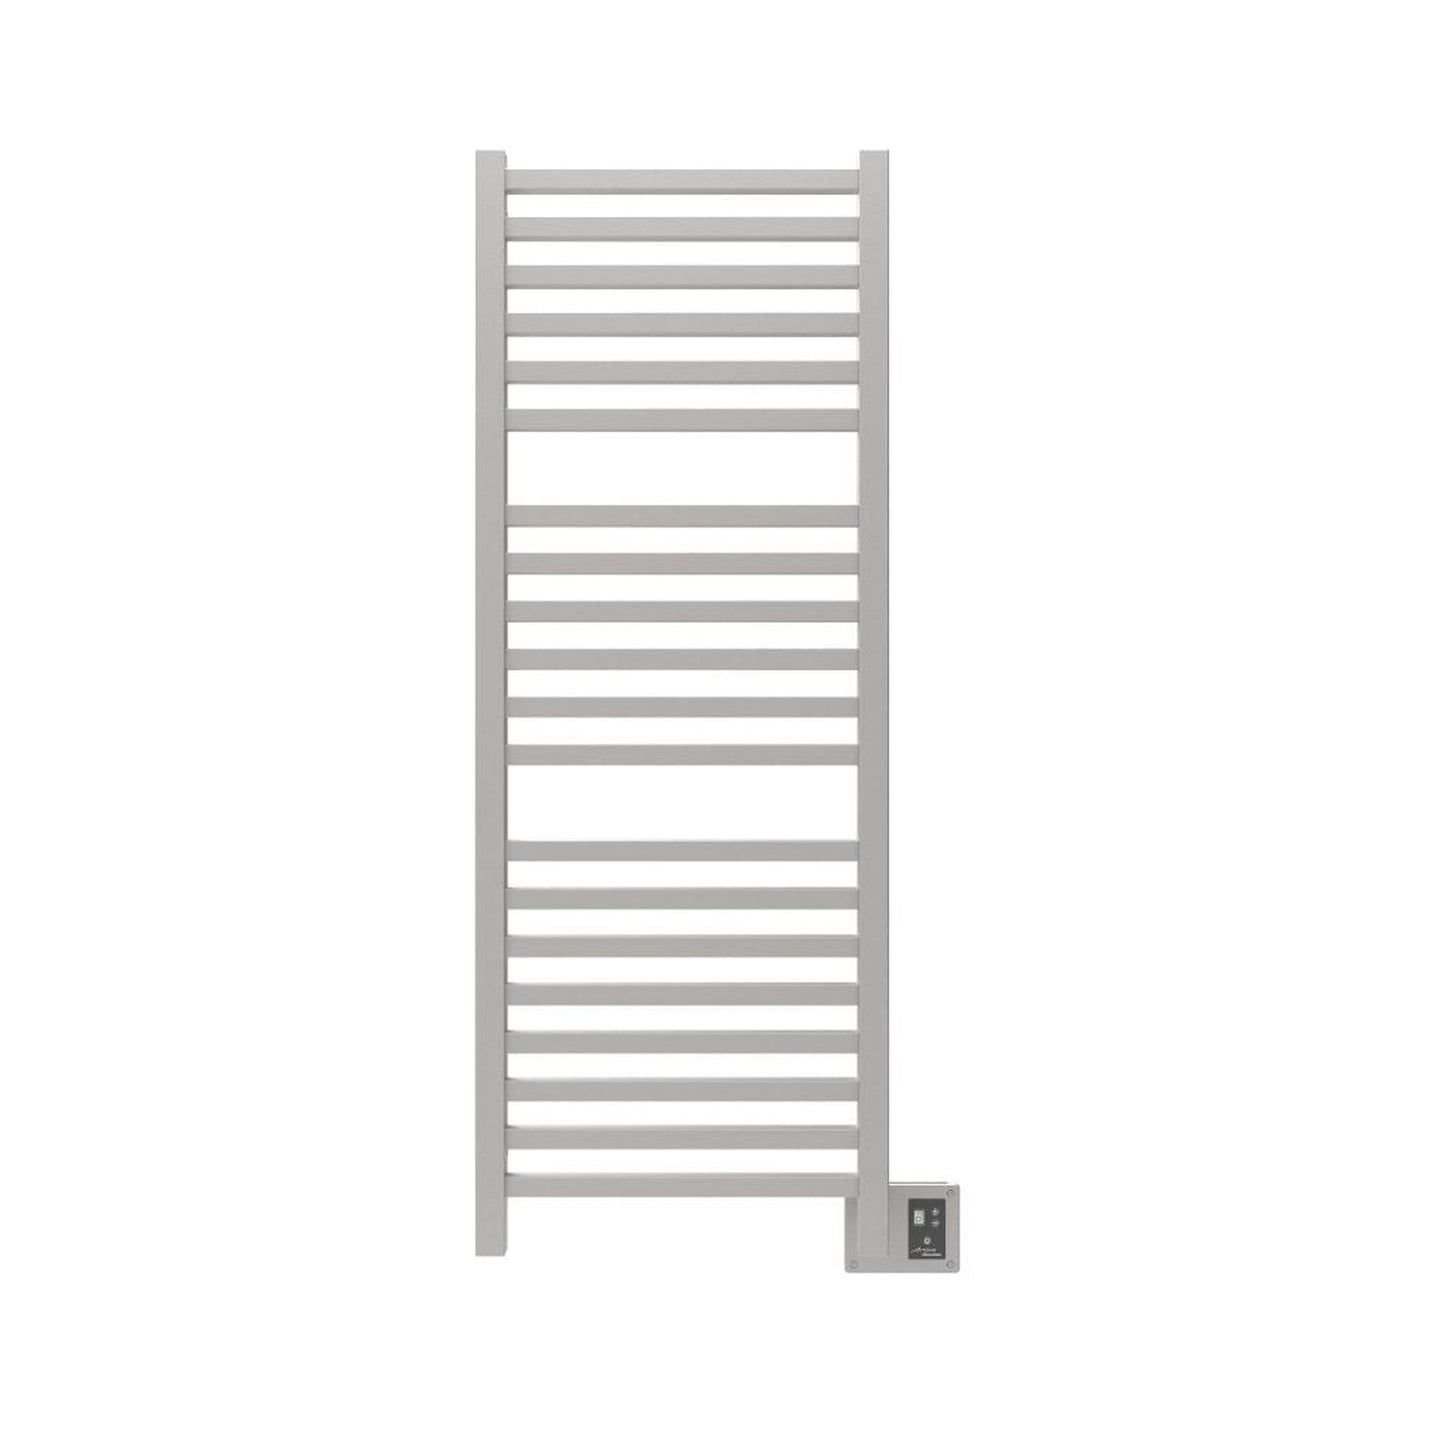 Amba Quadro 20" x 54" 20-Bar Brushed Stainless Steel Hardwired Towel Warmer With Digital Heat Controller